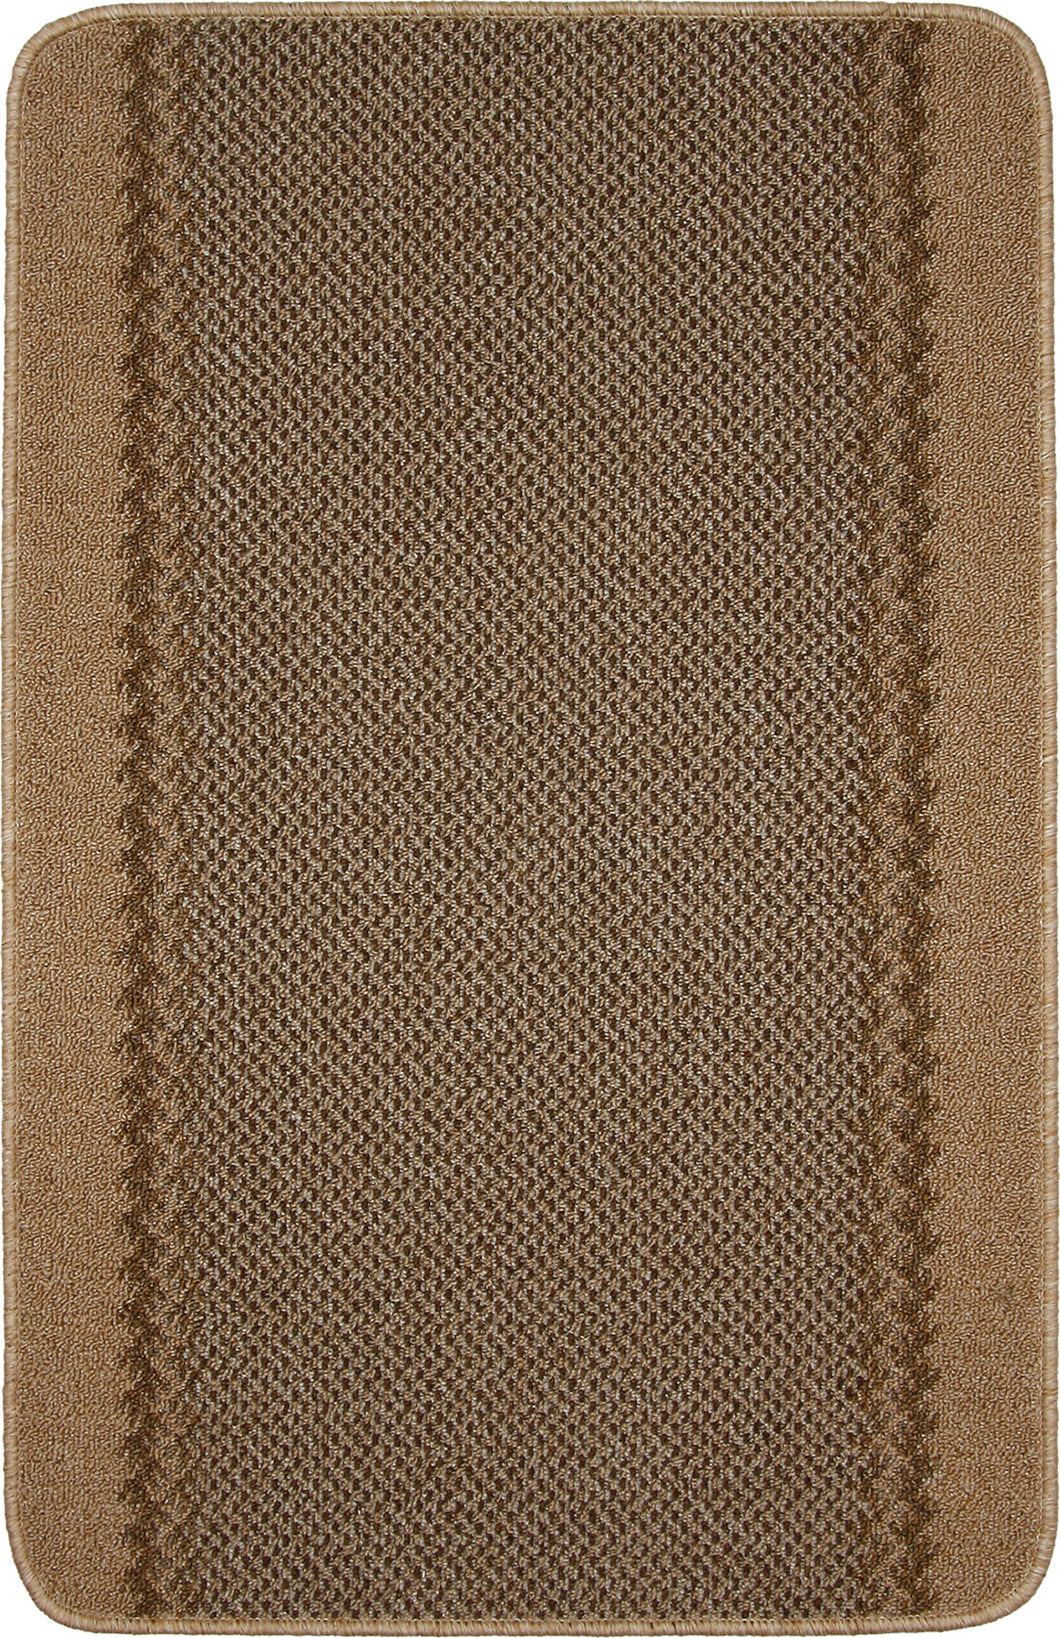 Kilkis Washable Doormat or Runner (9 Colours)